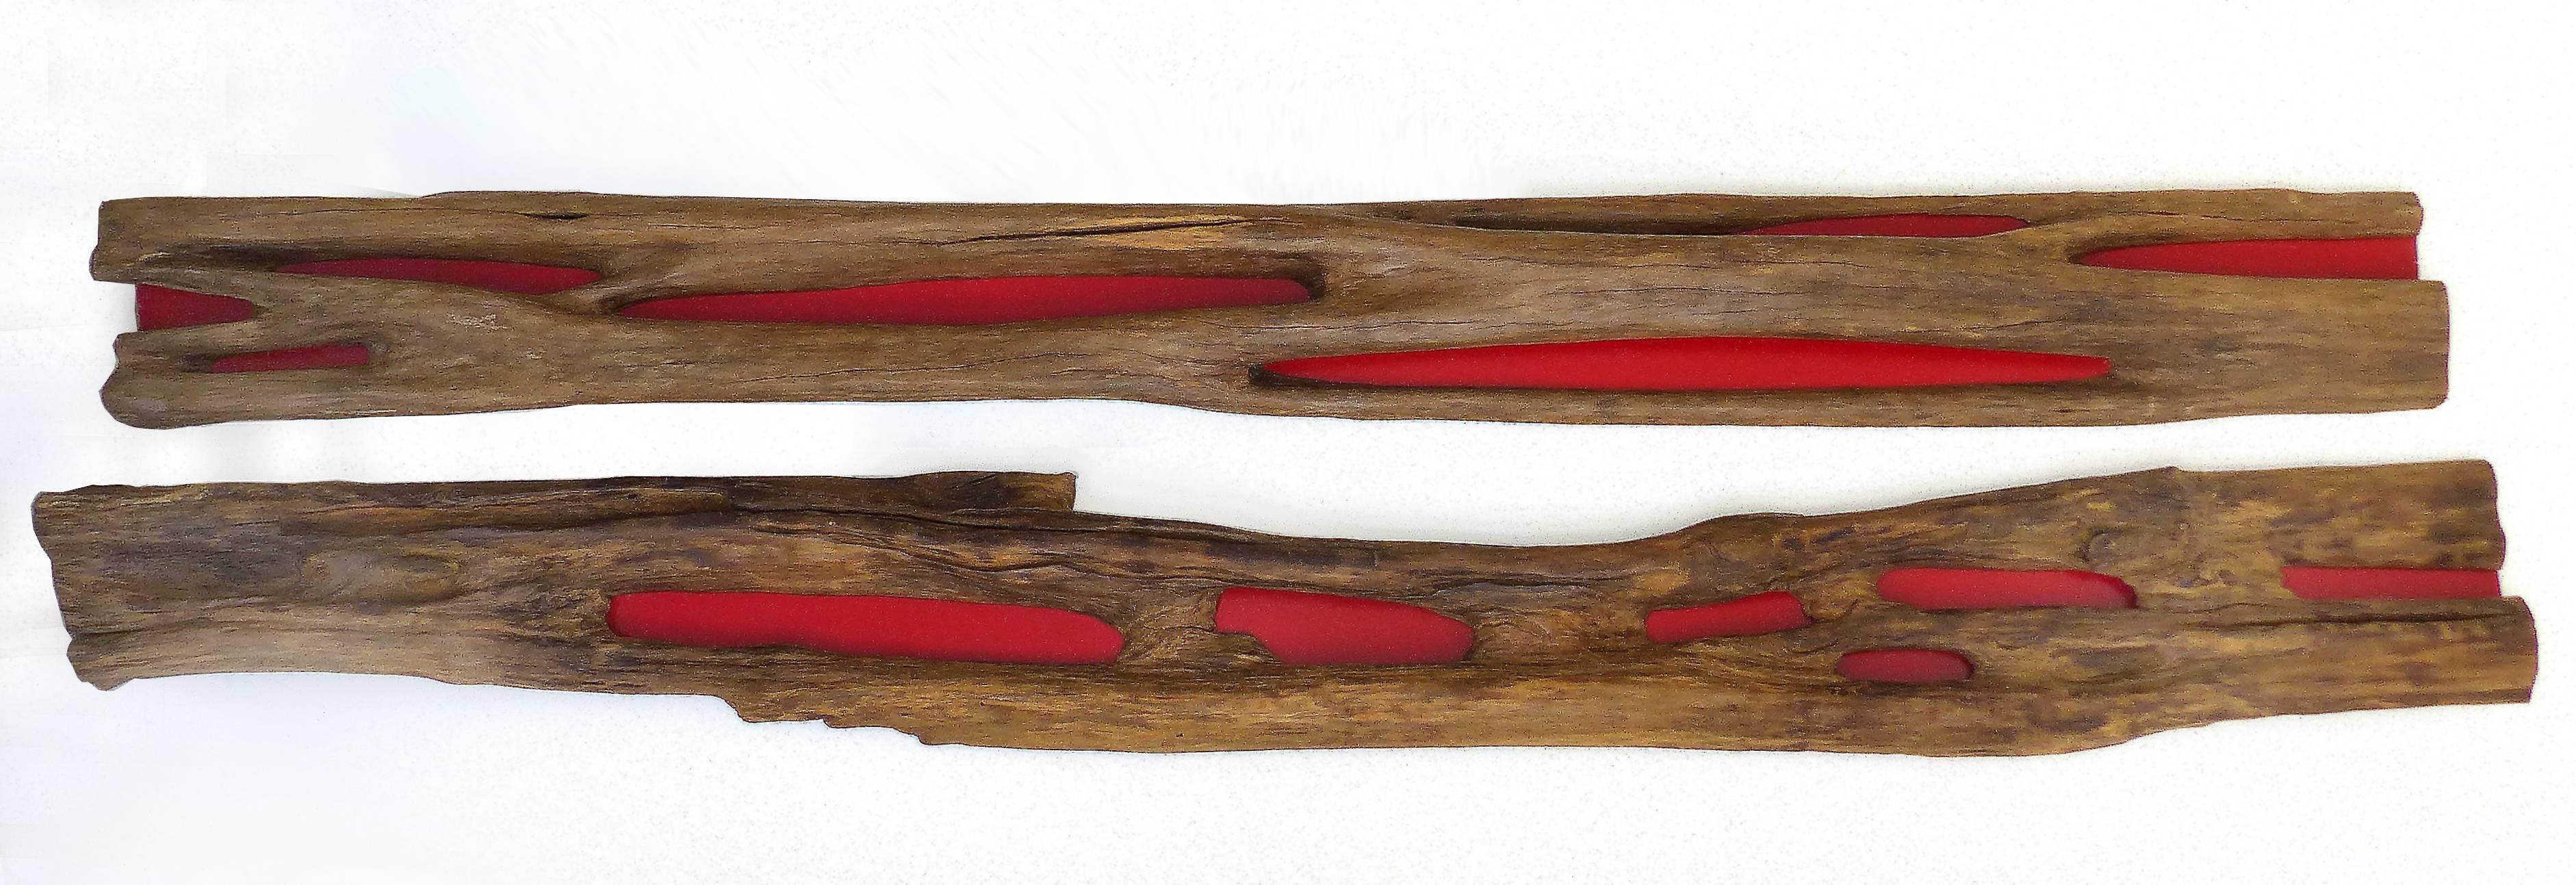 Pair of Reclaimed Wood Log Sculptures by Valeria Totti

Offered are a pair of panels that could flank either side of a doorway or be mounted vertically as wall sculptures. These are made of reclaimed wood called Acariquara from the Brazilian Amazon.